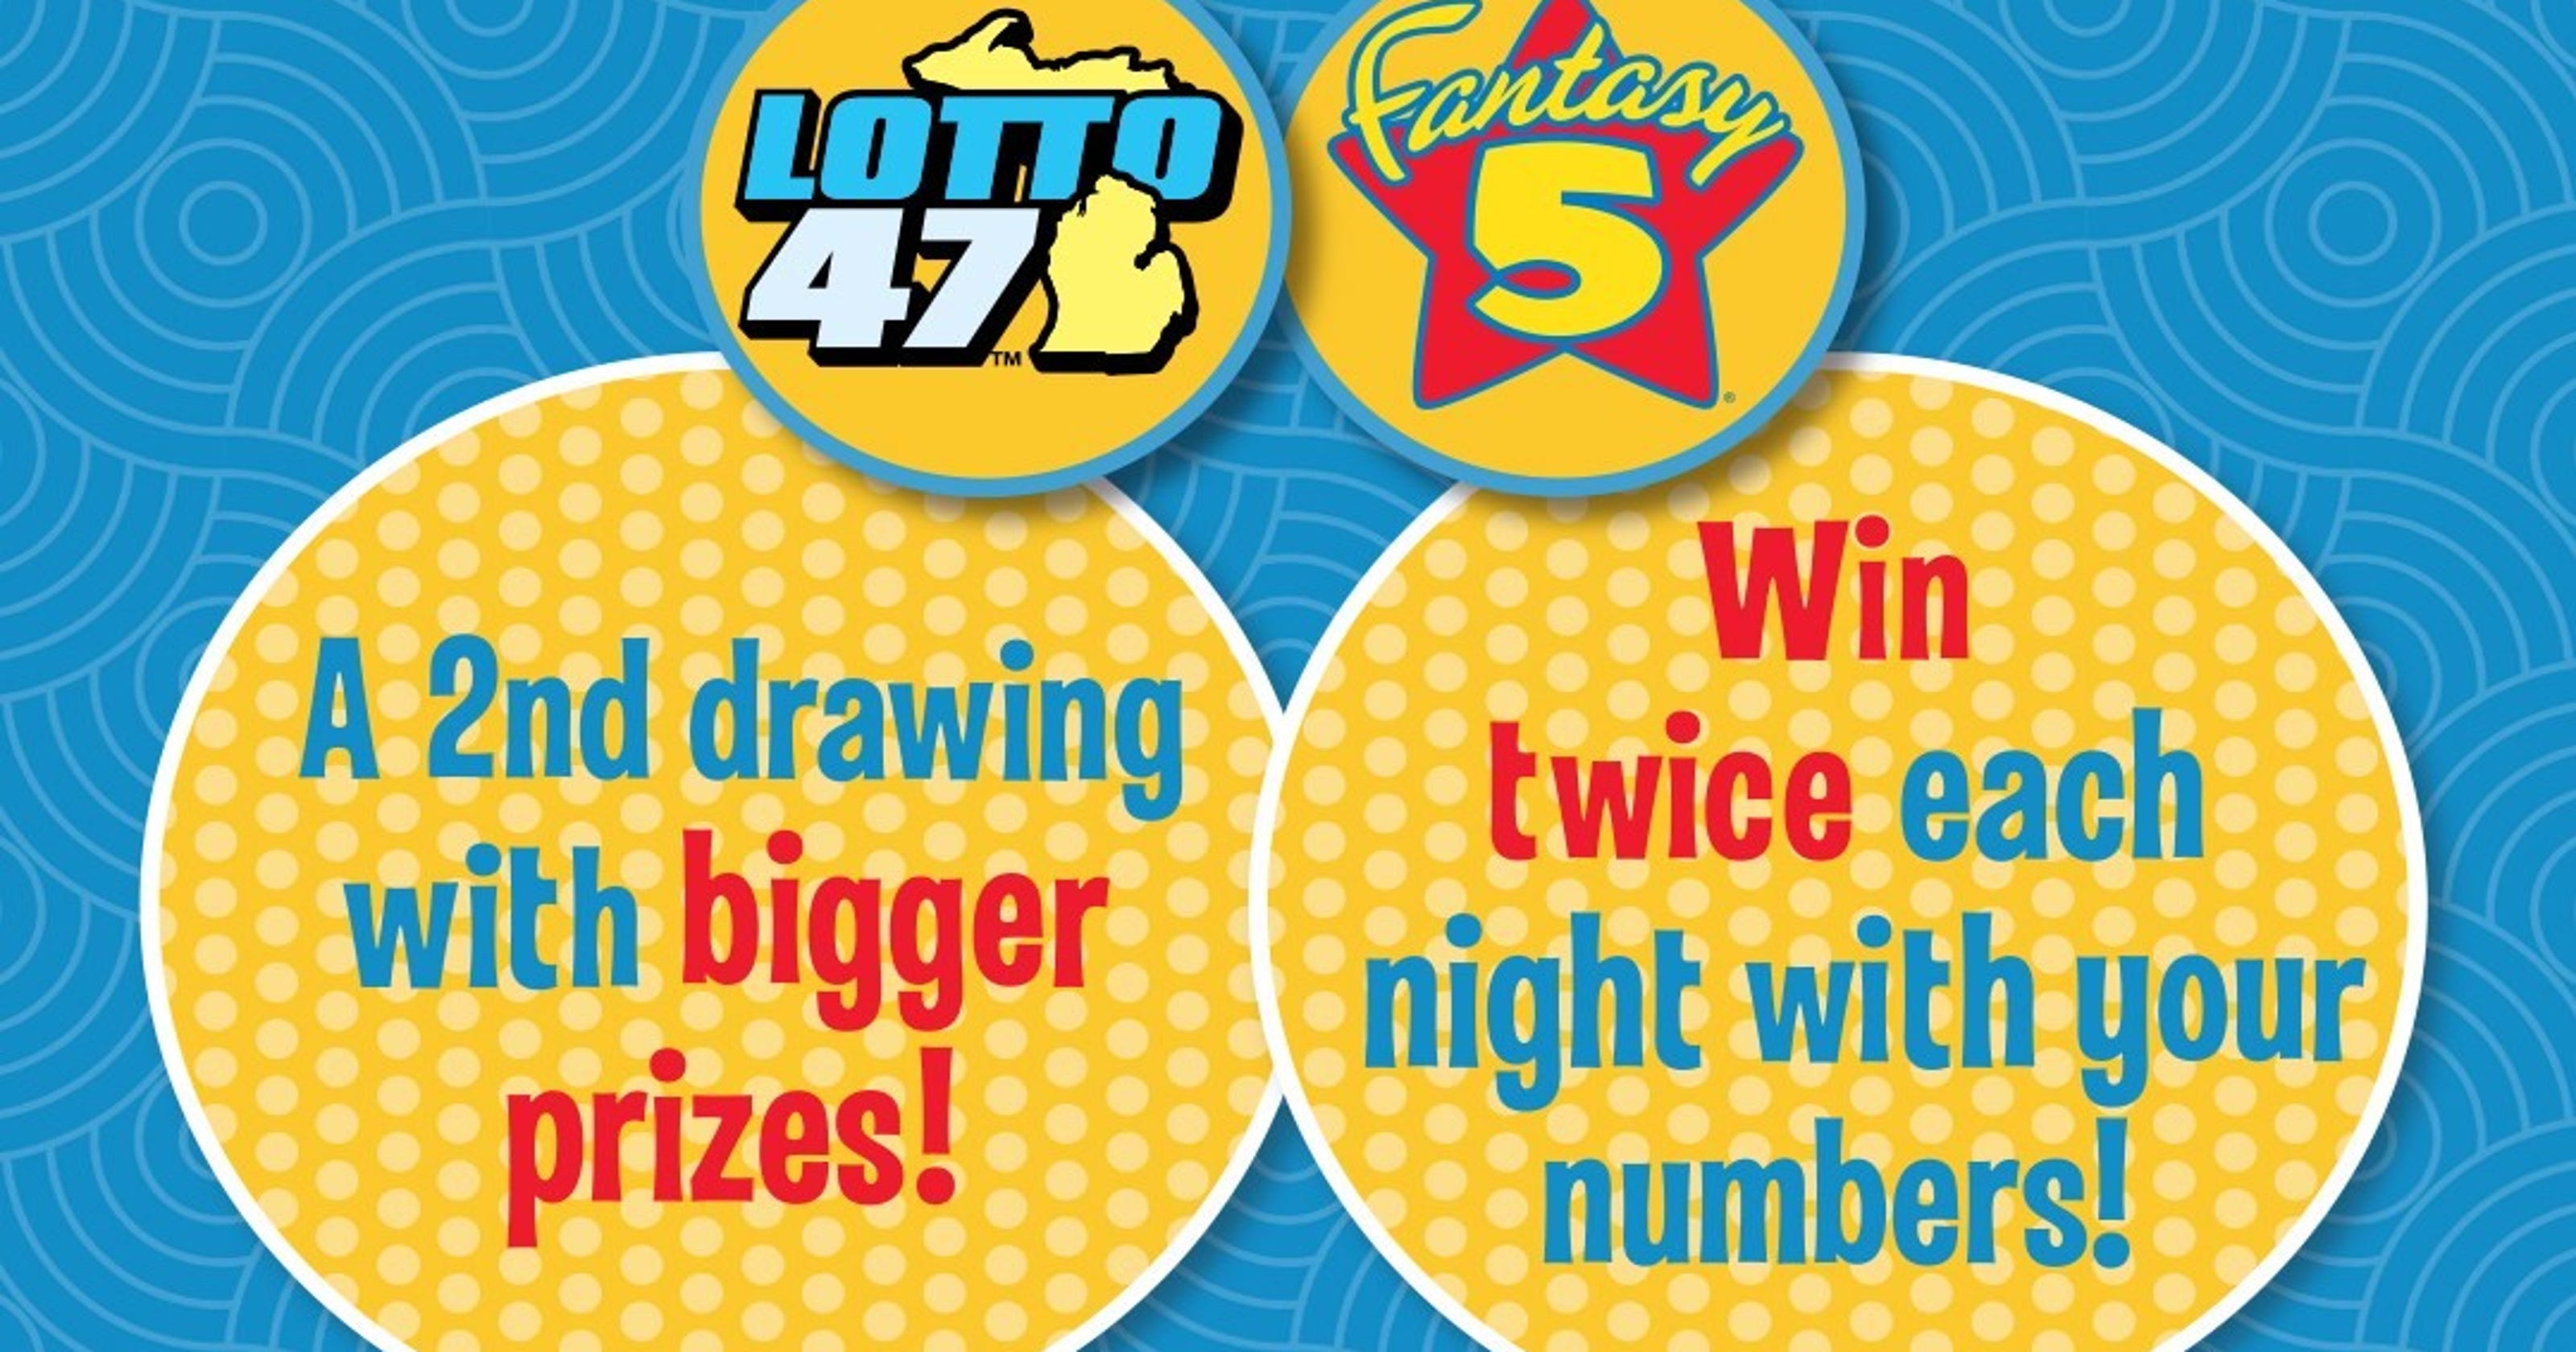 Mich. Lottery adds 2nd chance option for Fantasy 5, Lotto 47